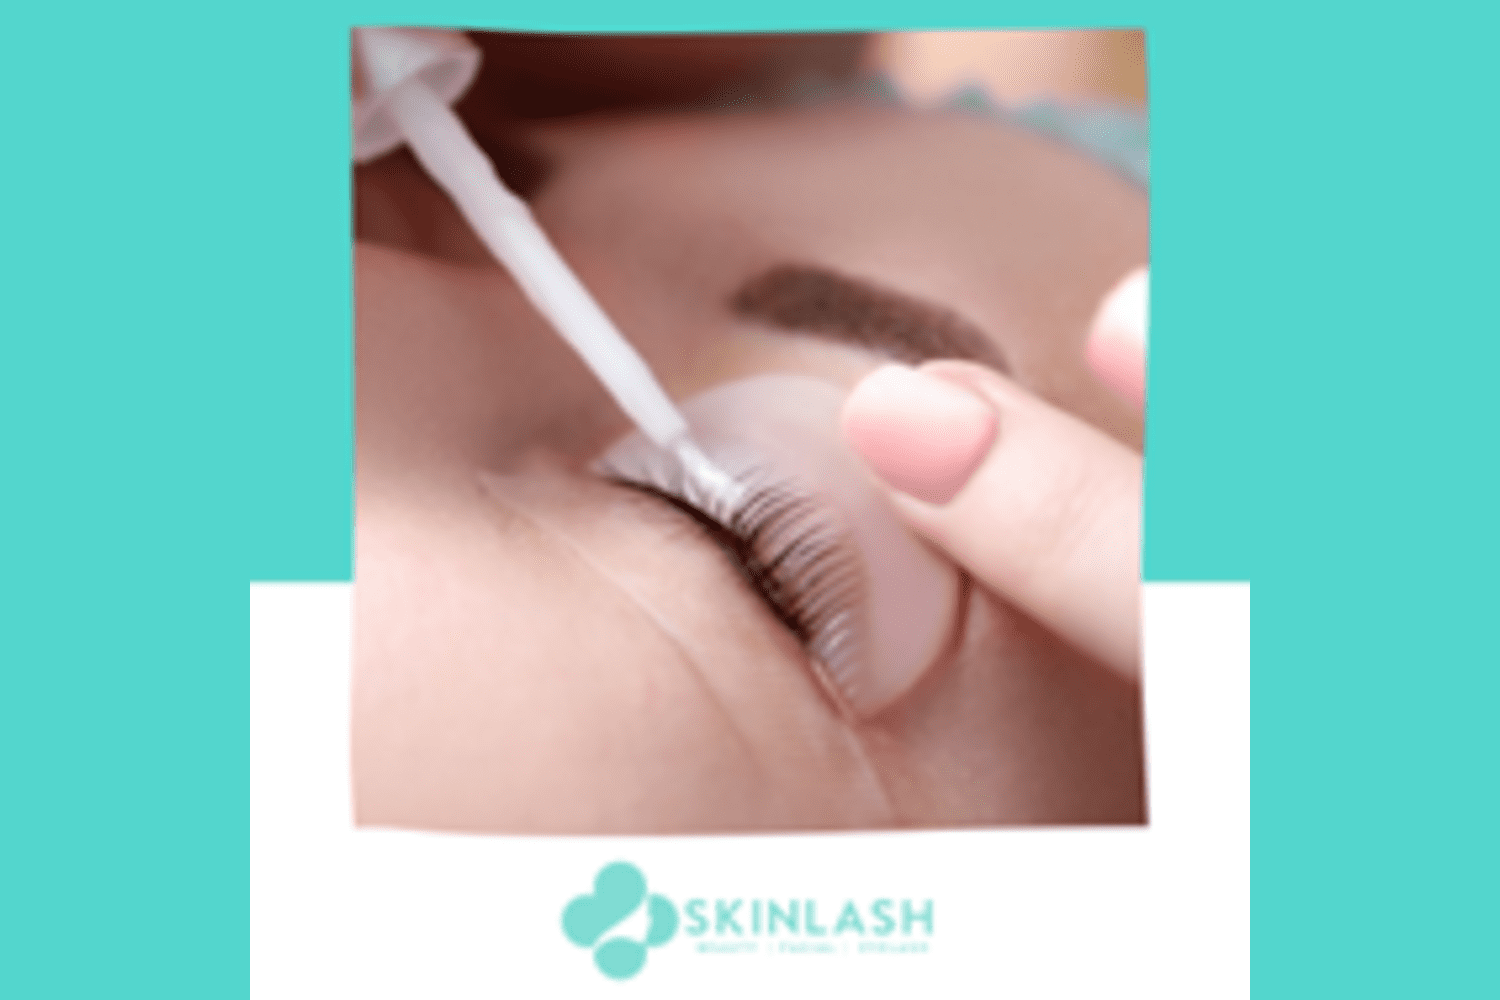 Japanese Magical Eyelash Lifting with Lash Spa (1 Session) at Skinlash - Get Deals, Cashback and Rewards with ShopBack GO